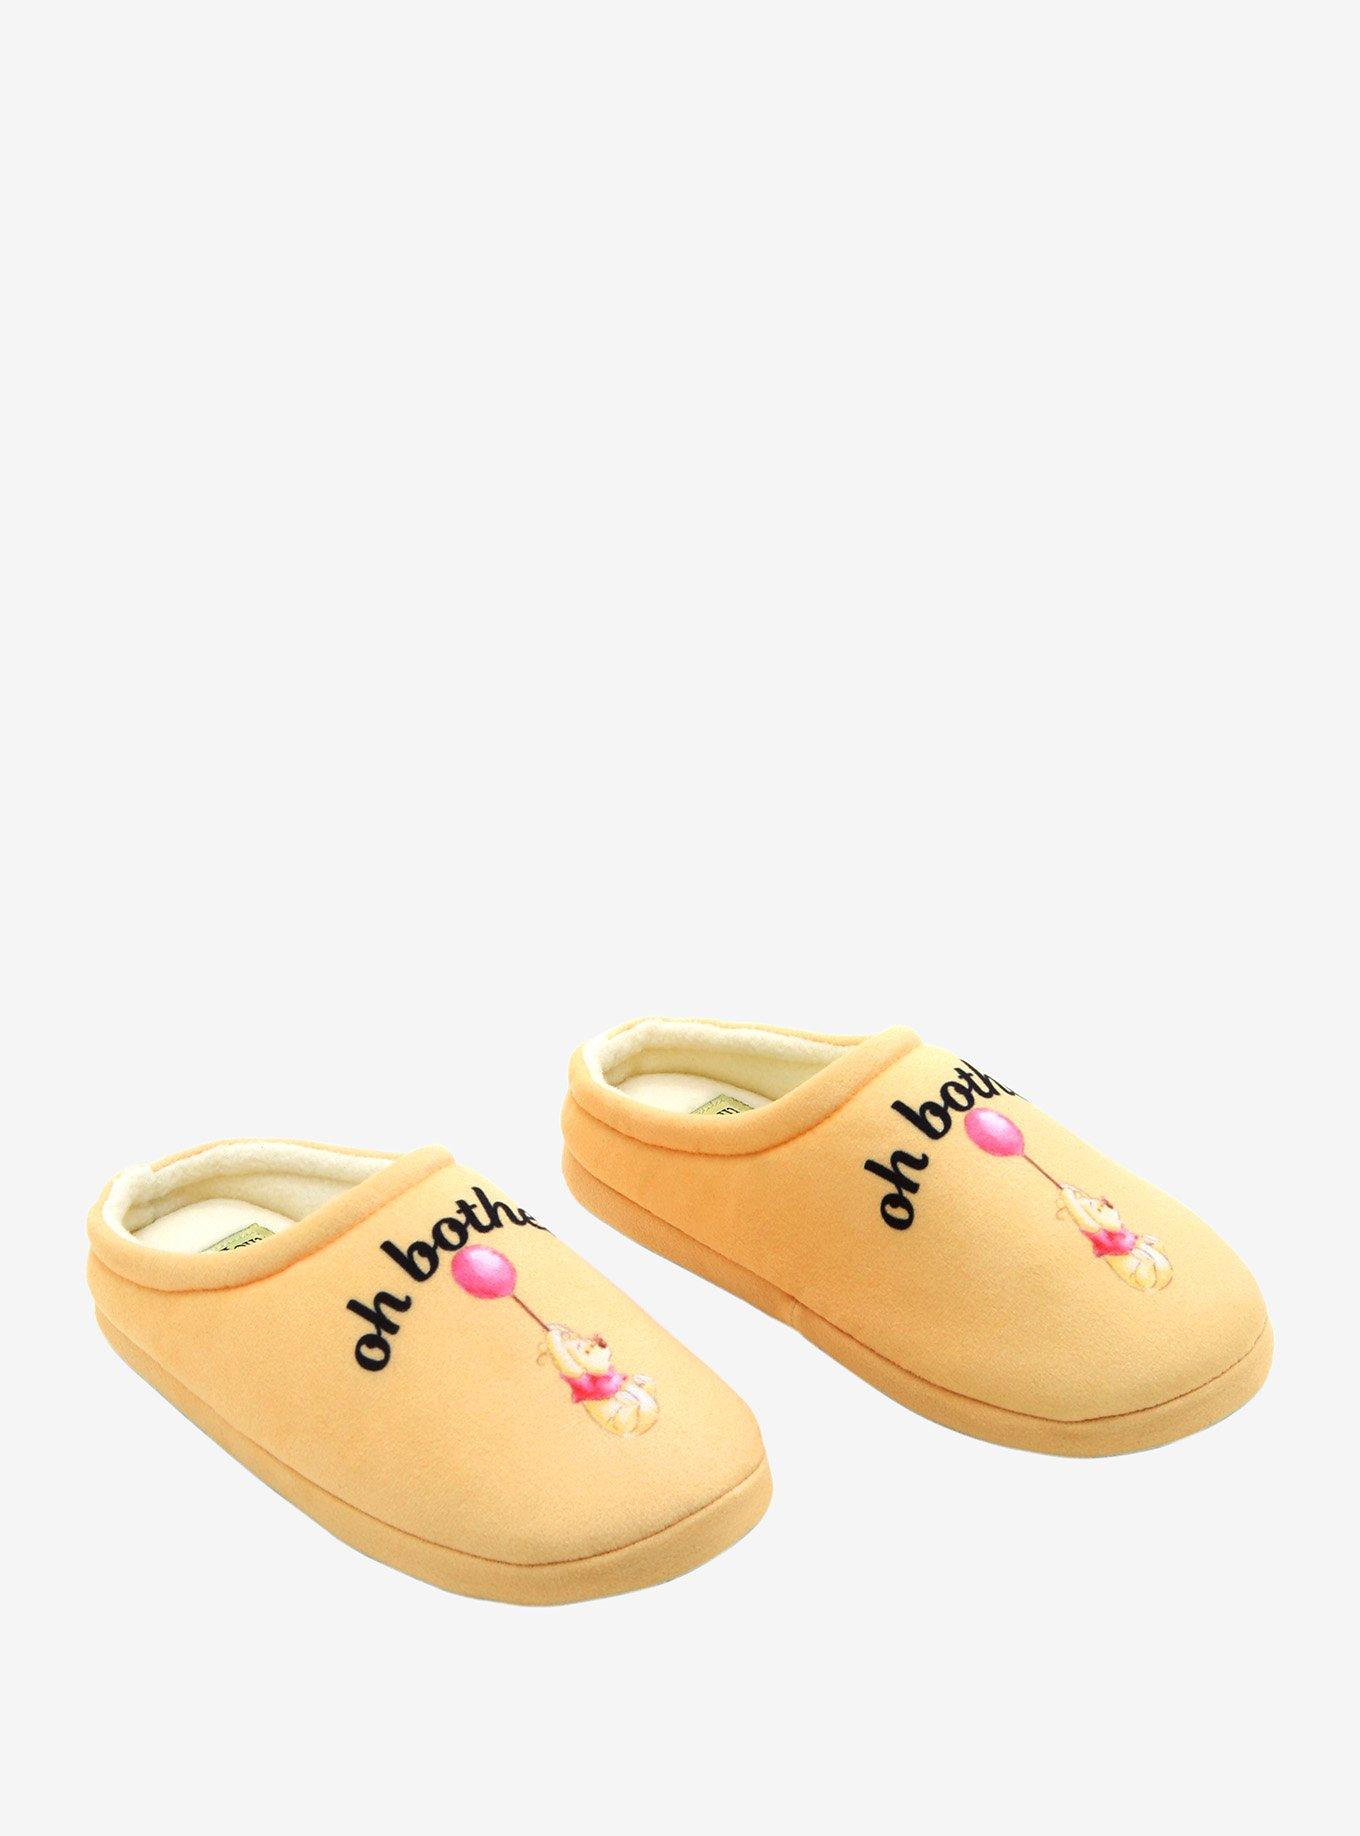 Disney Winnie The Pooh Oh Bother Slippers, MULTI, hi-res